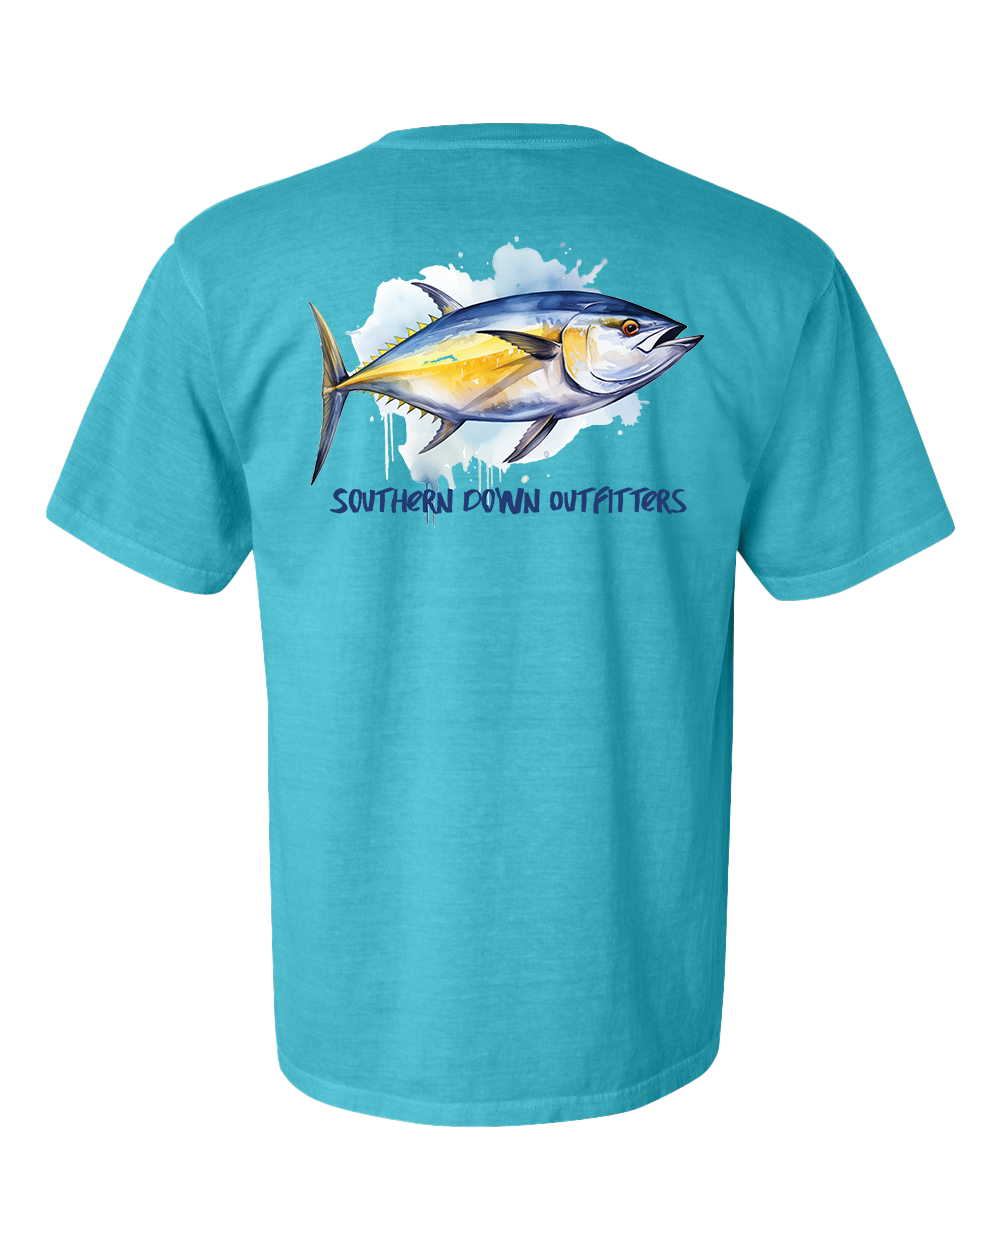 Yellow Fin Tuna Tee – Southern Down Outfitters